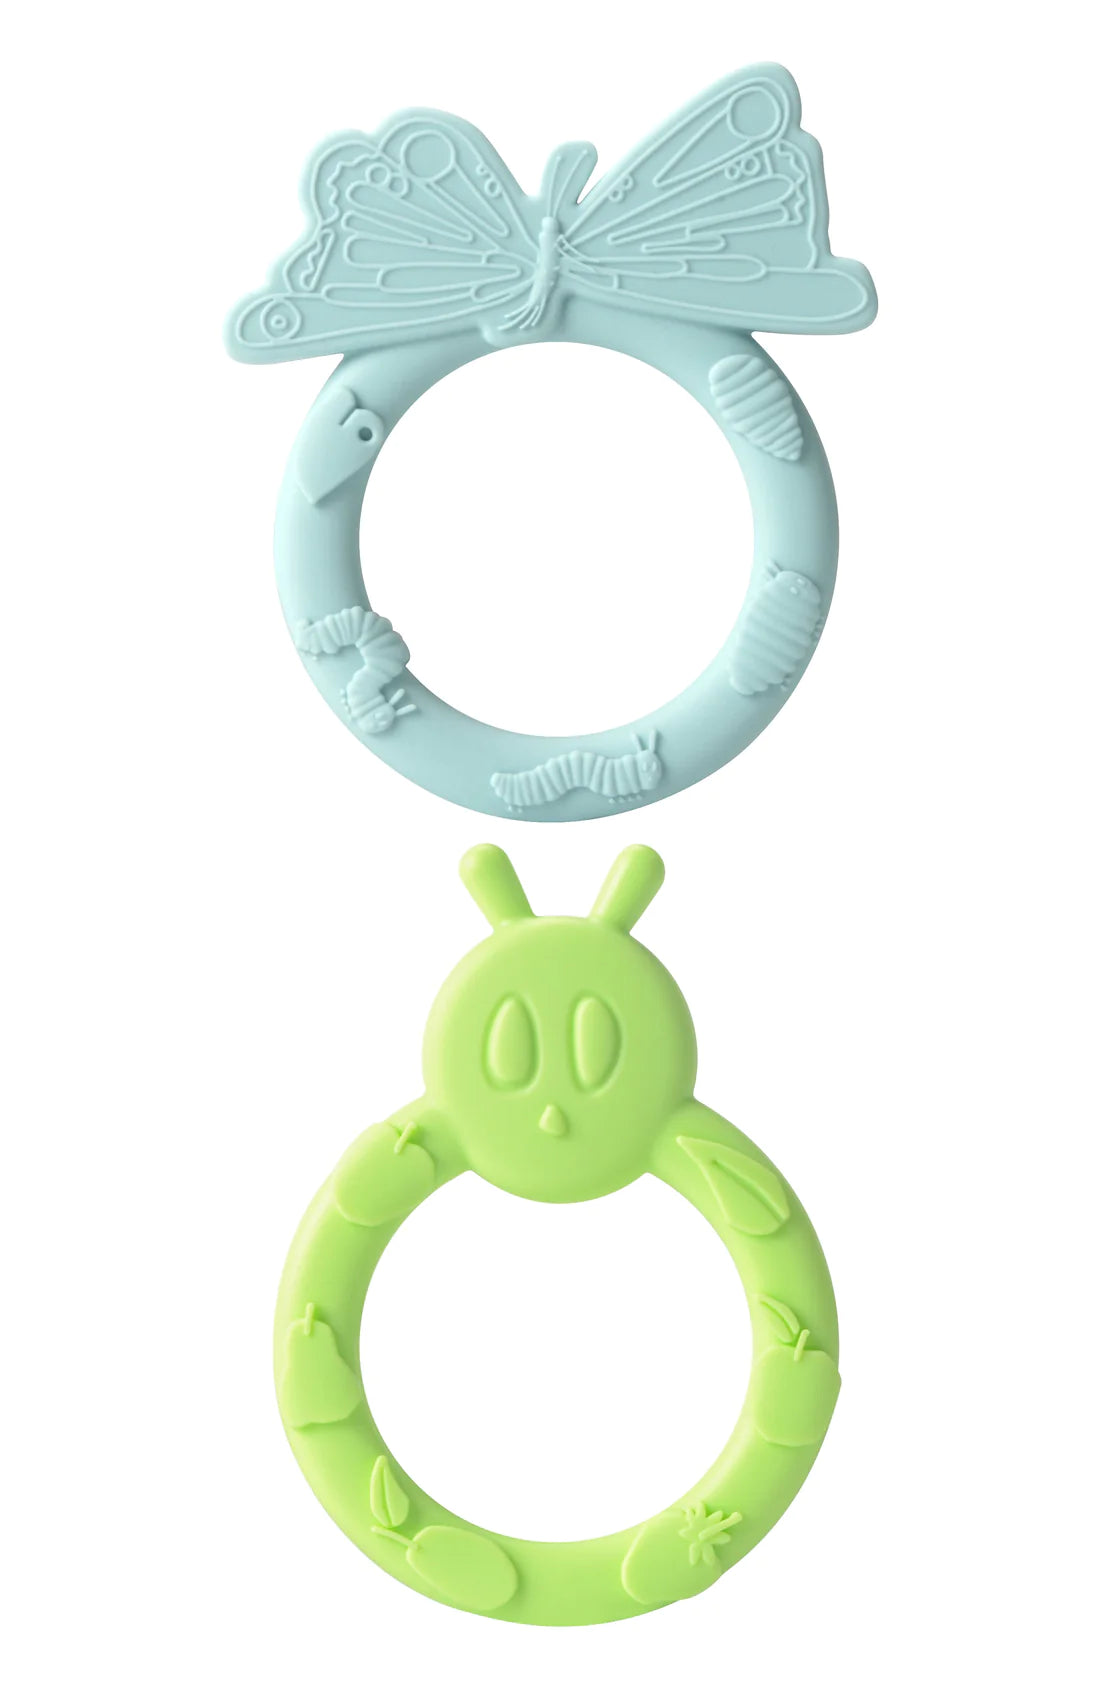 LouLou Lollipop Silicone Teether Ring Set - Eric Carle